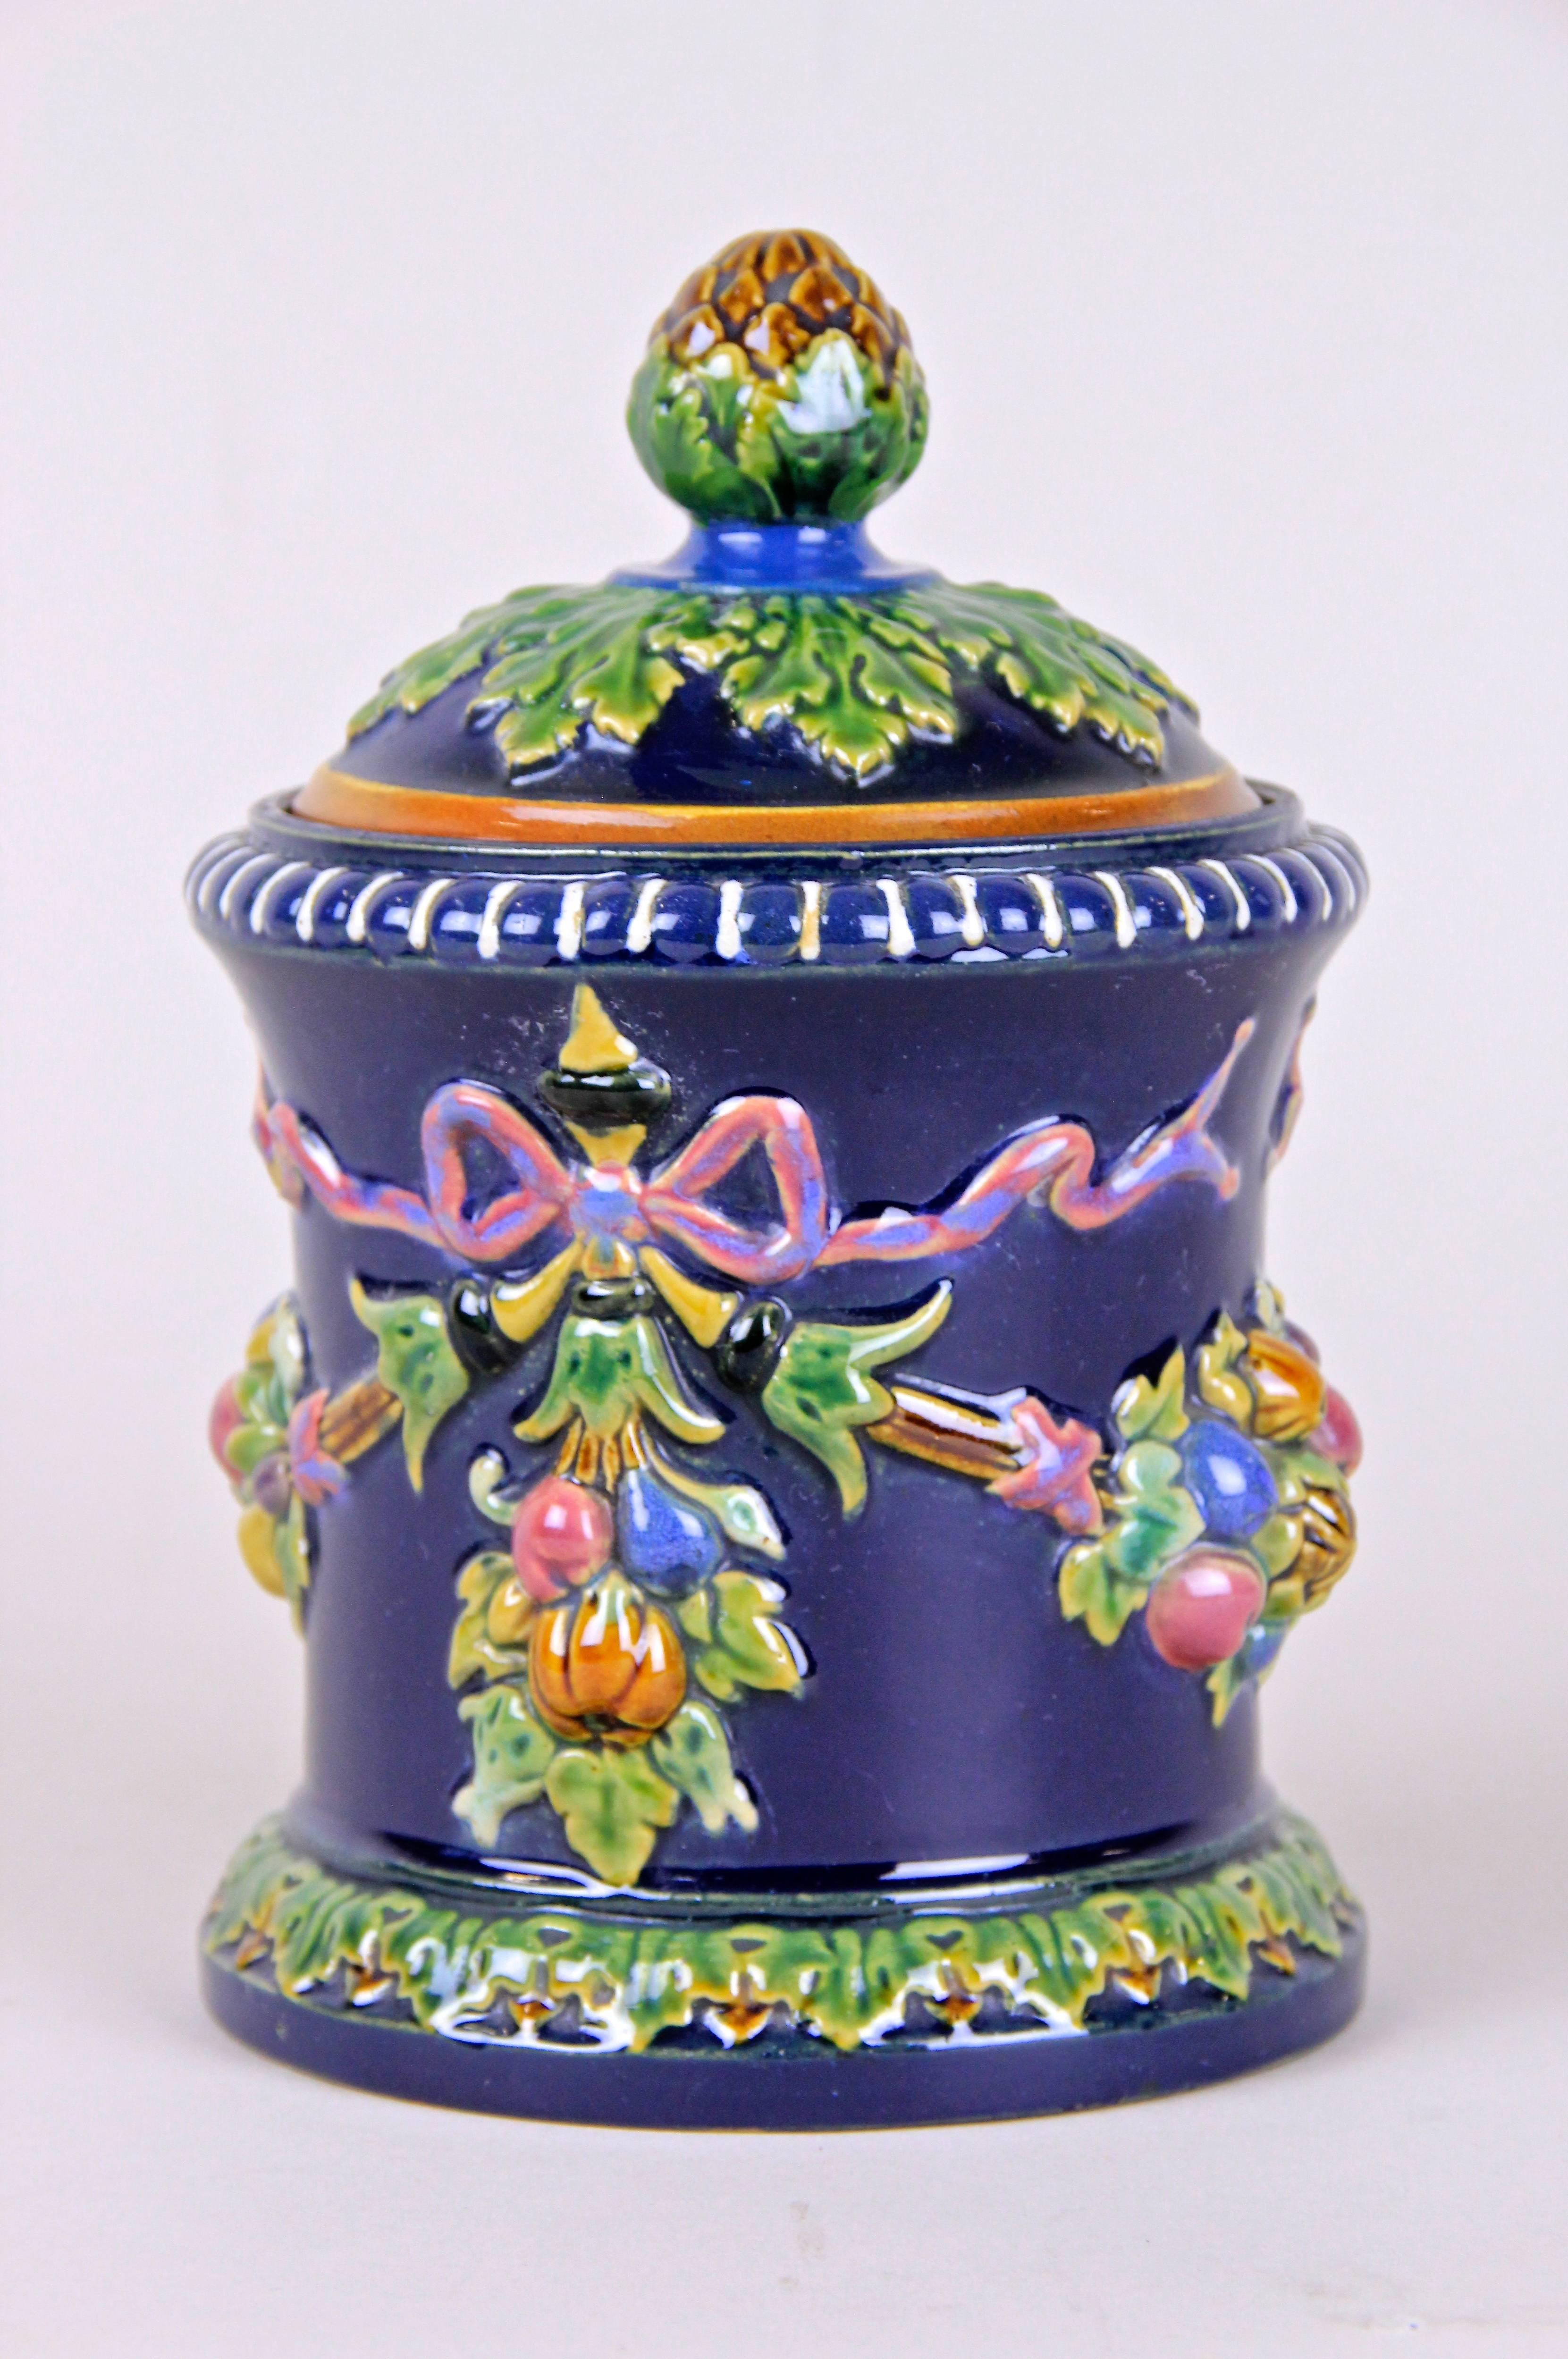 Dreamlike Art Nouveau Tobacco Box designed by famous company of Gerbing & Stephan in the very early 20th century. Coming out of Bohemia this great Art Nouveau Tobacco Box impresses with the pleasing design with different colored fruits and ribbons